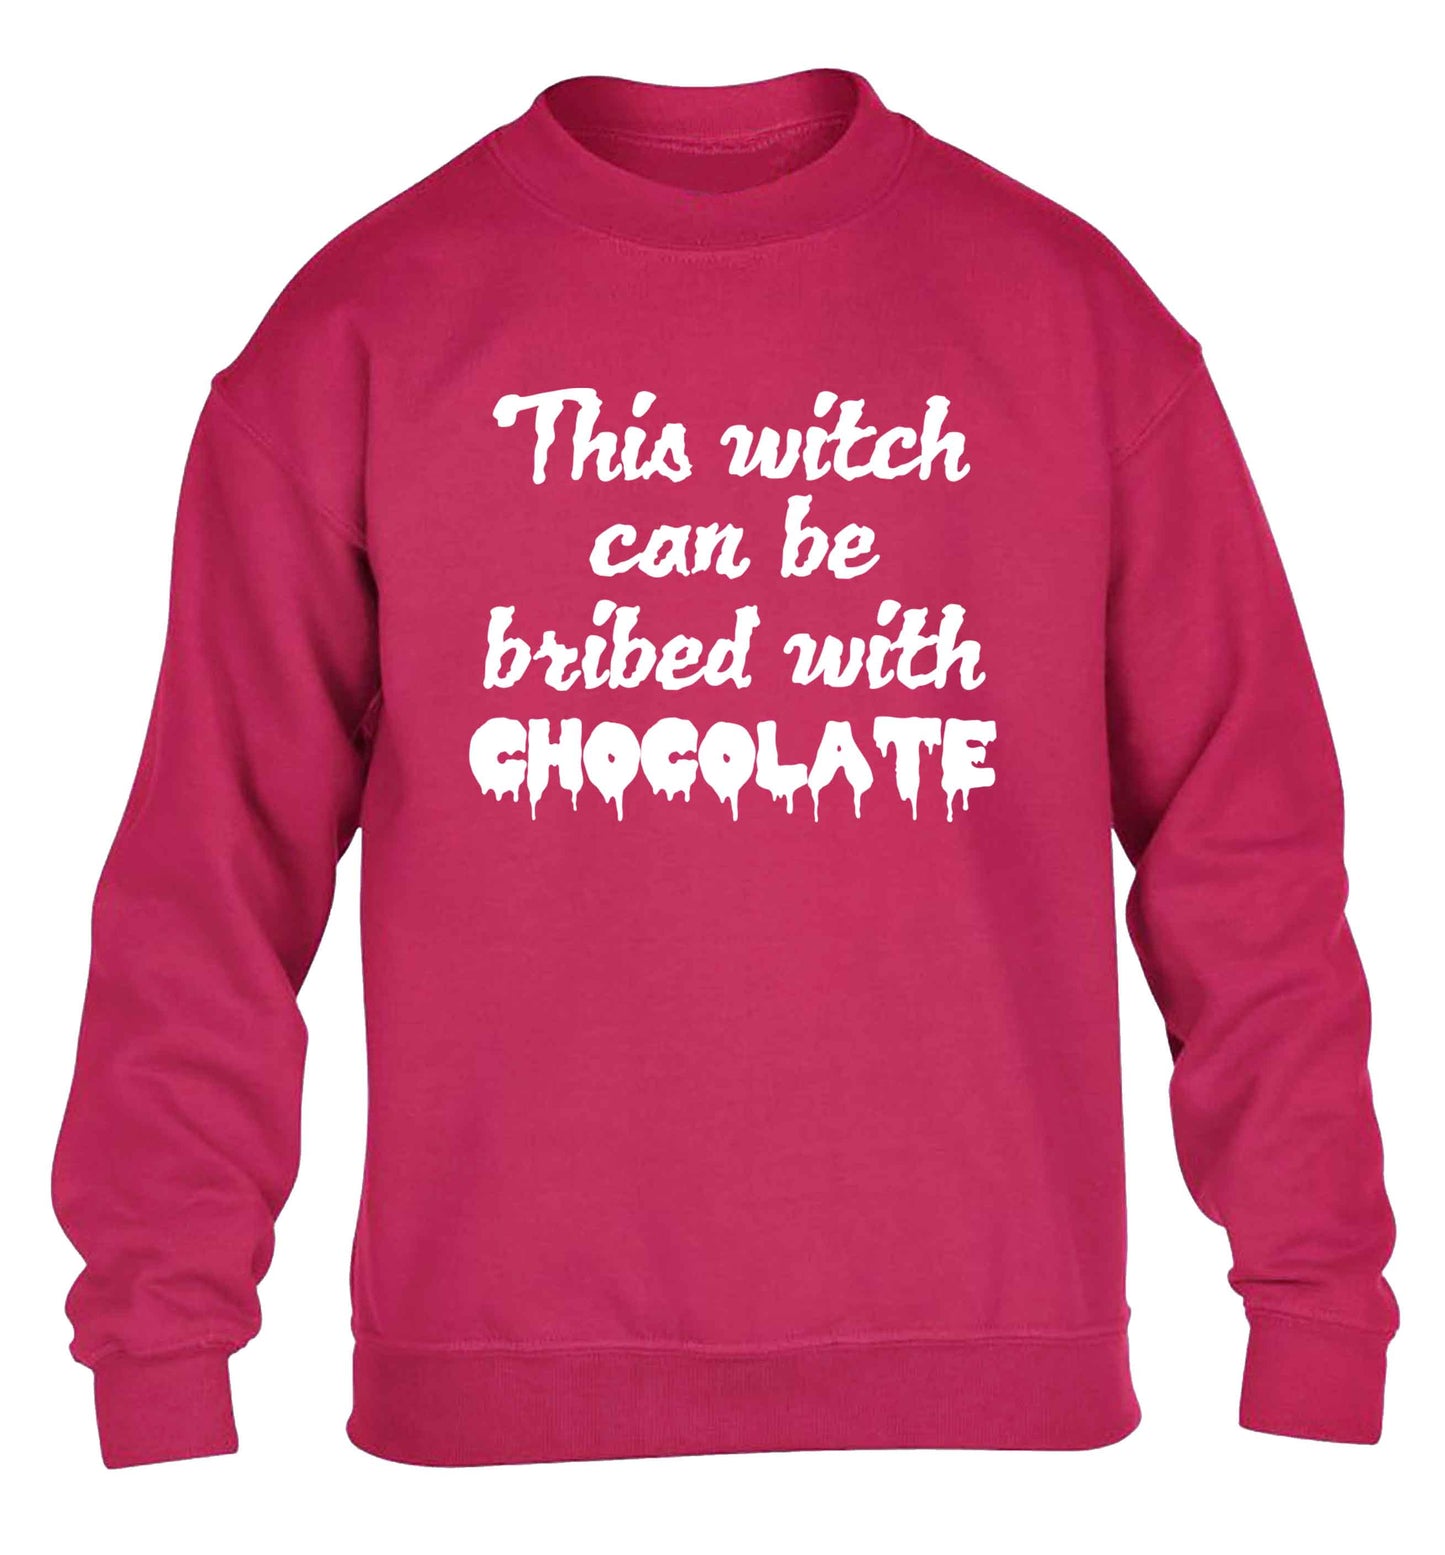 This witch can be bribed with chocolate children's pink sweater 12-13 Years